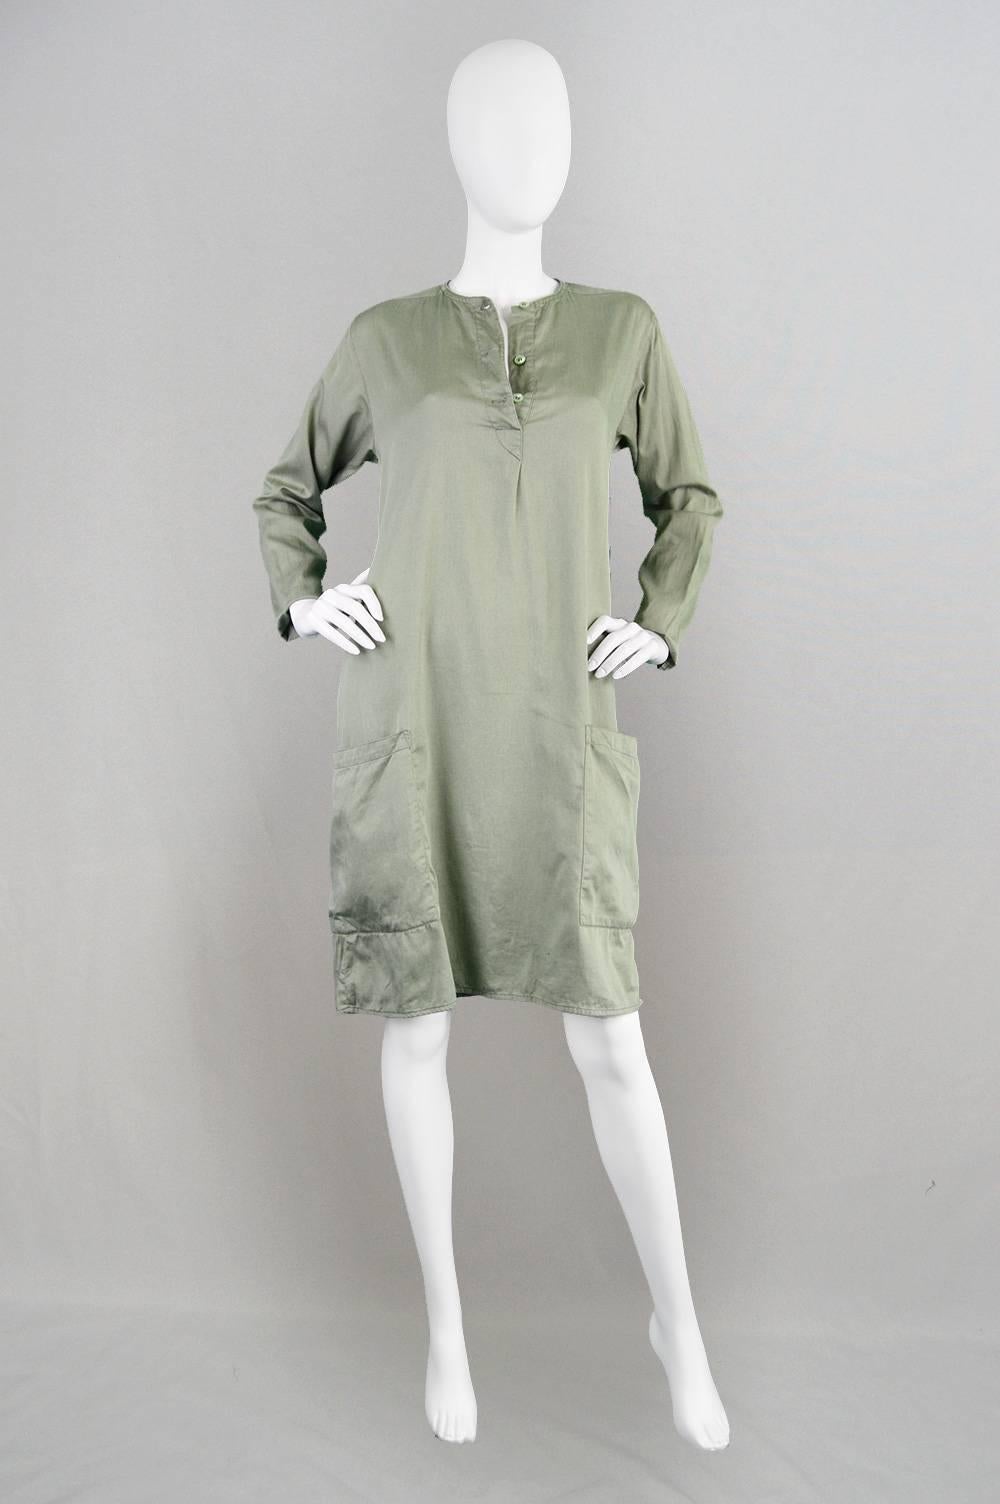 A stunning vintage Kenzo Jap dress from the 1970s, a great example of his earlier work. The beauty of this minimalist cotton shift/ tunic dress is in its simplicity - which makes it incredible for layering or worn as a minimalist look. Inspired by